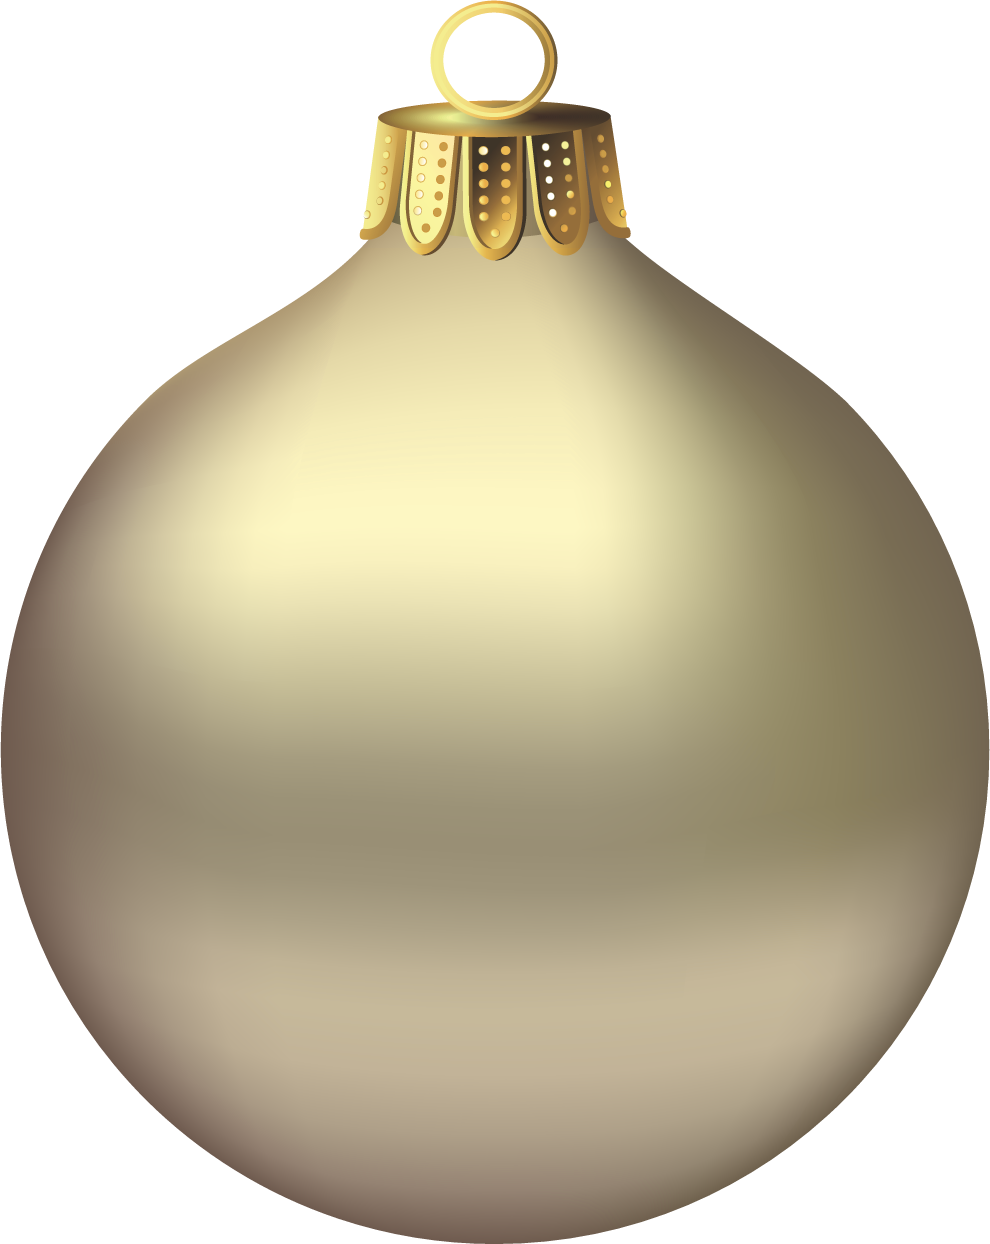 Free Gold Christmas Ornament Png, Download Free Gold Christmas Ornament ...